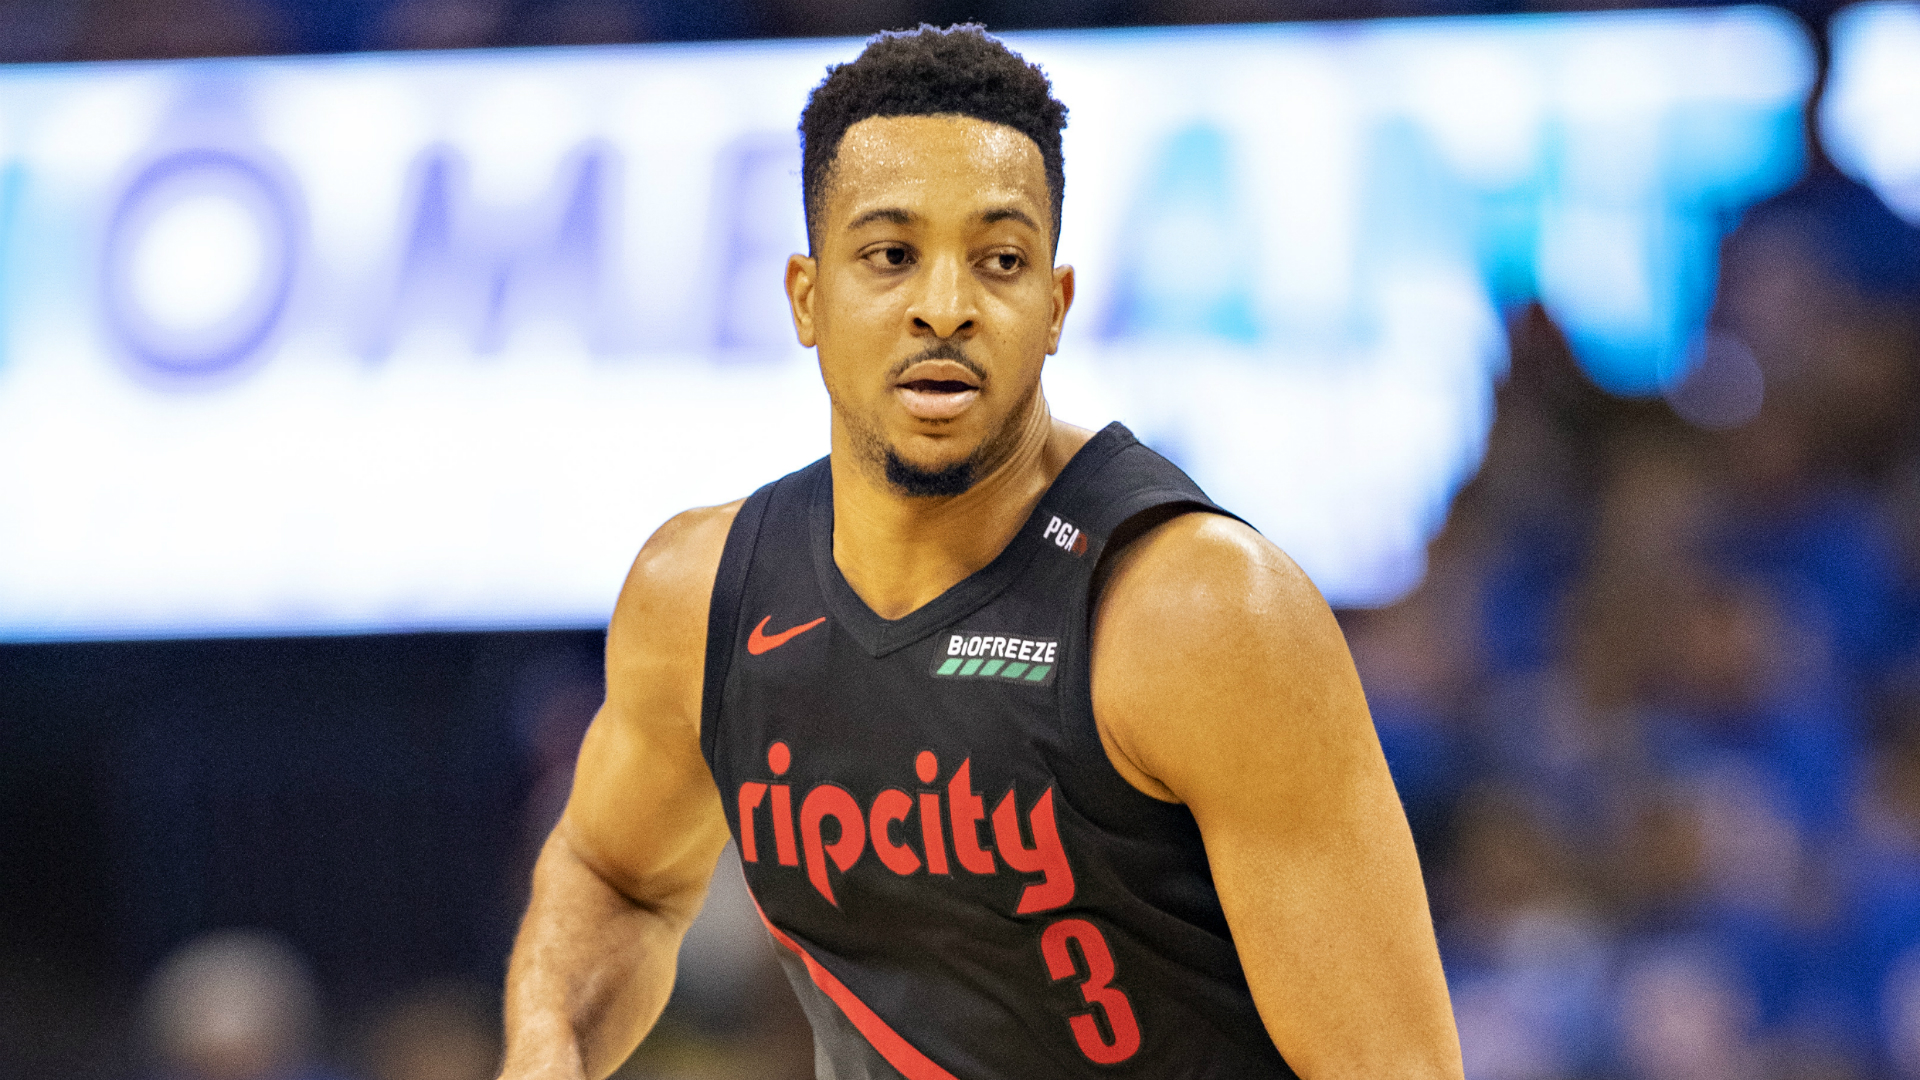 CJ McCollum is on the brink of a semi-final spot with the Portland Trail Blazers but past NBA playoffs failures continue to motivate him.